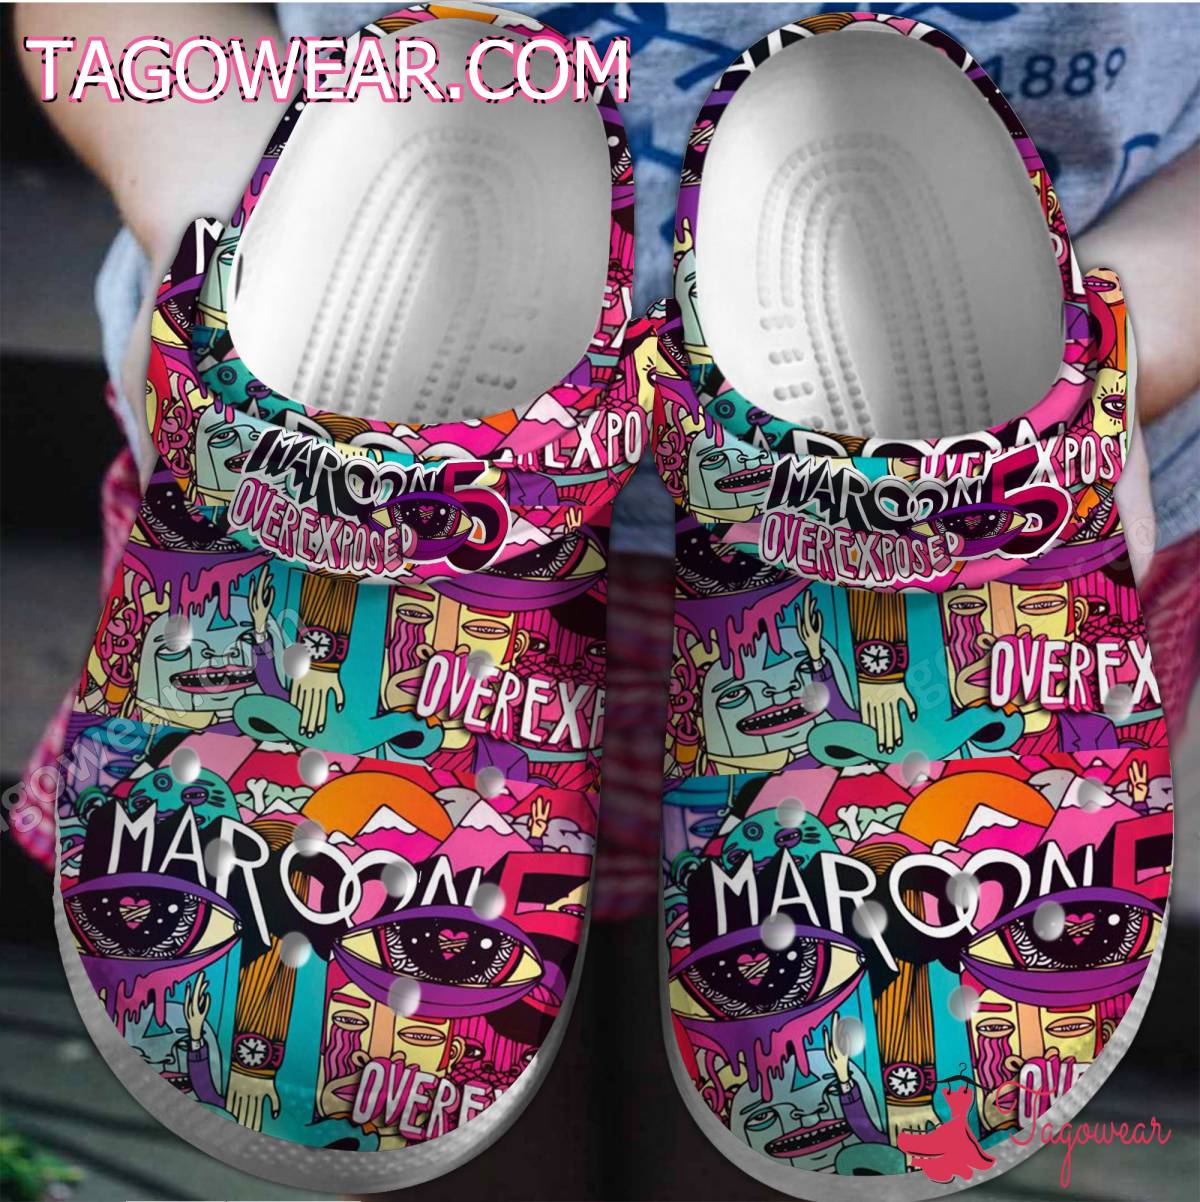 Maroon 5 Overexposed Album Cover Crocs Clogs Shoes